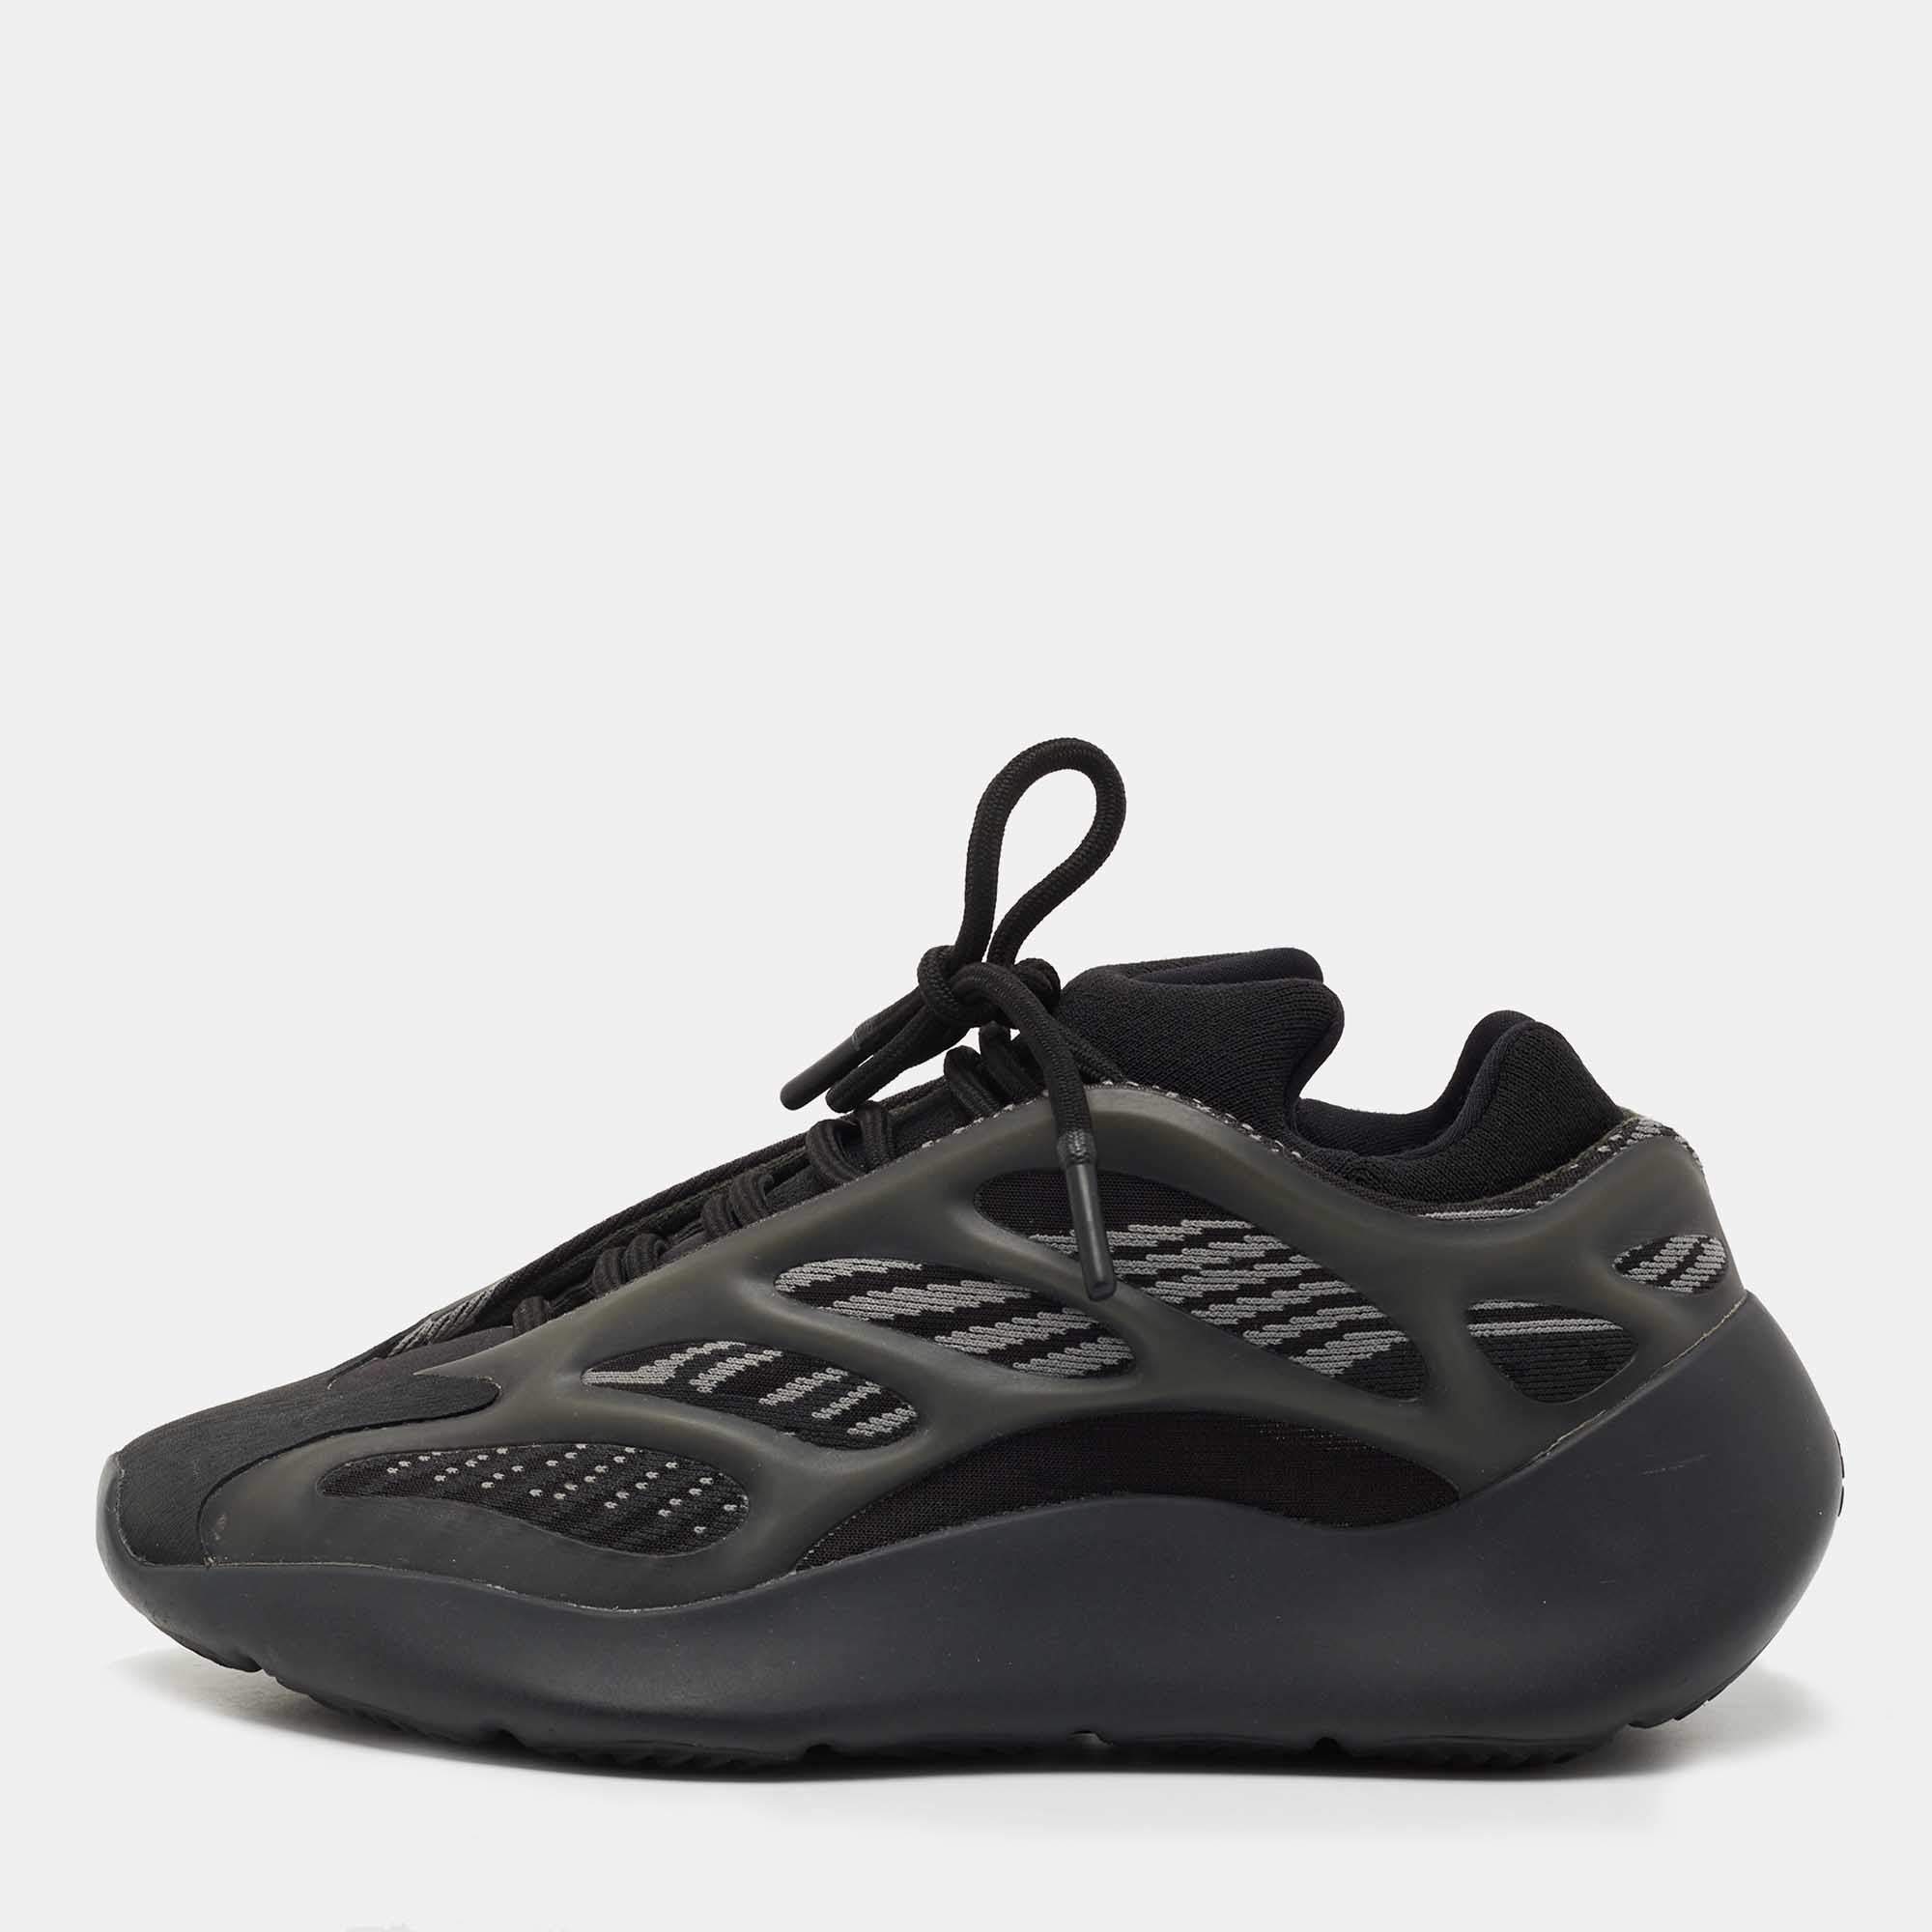 Yeezy x Adidas Fabric and Rubber YEEZY 700 V3 "Alvah" Sneakers Size 37 1/3 Yeezy x | TLC